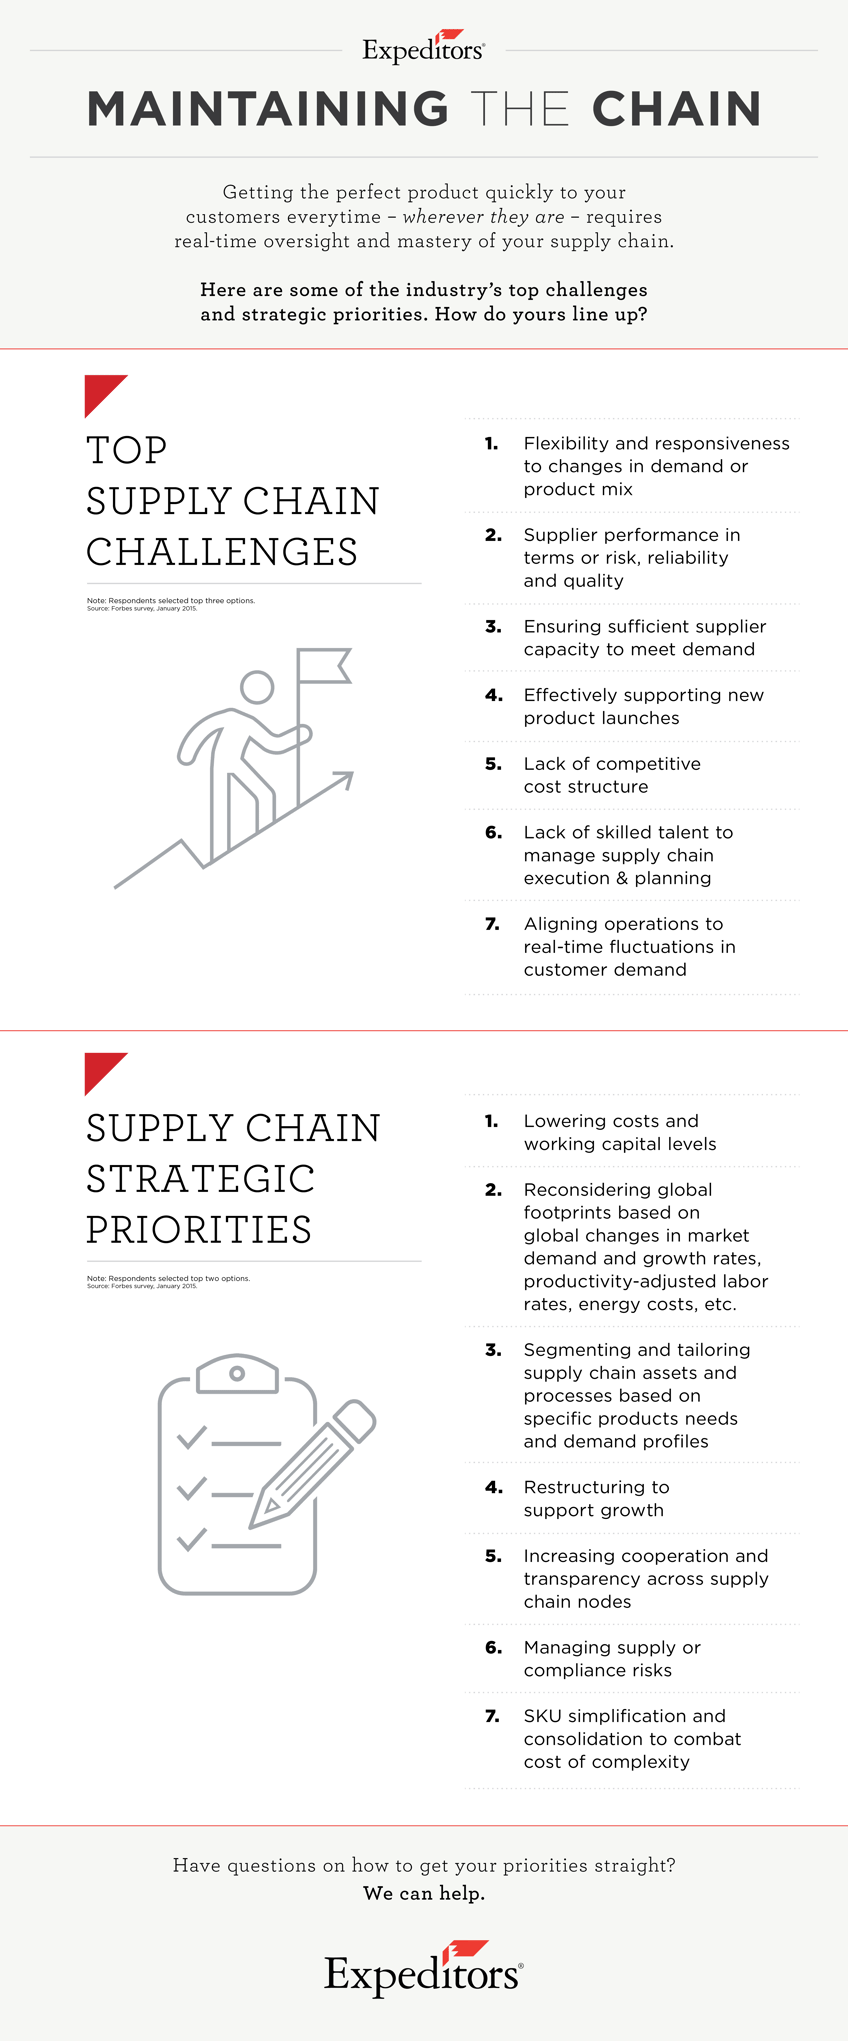 supply chain, challenges, priorities